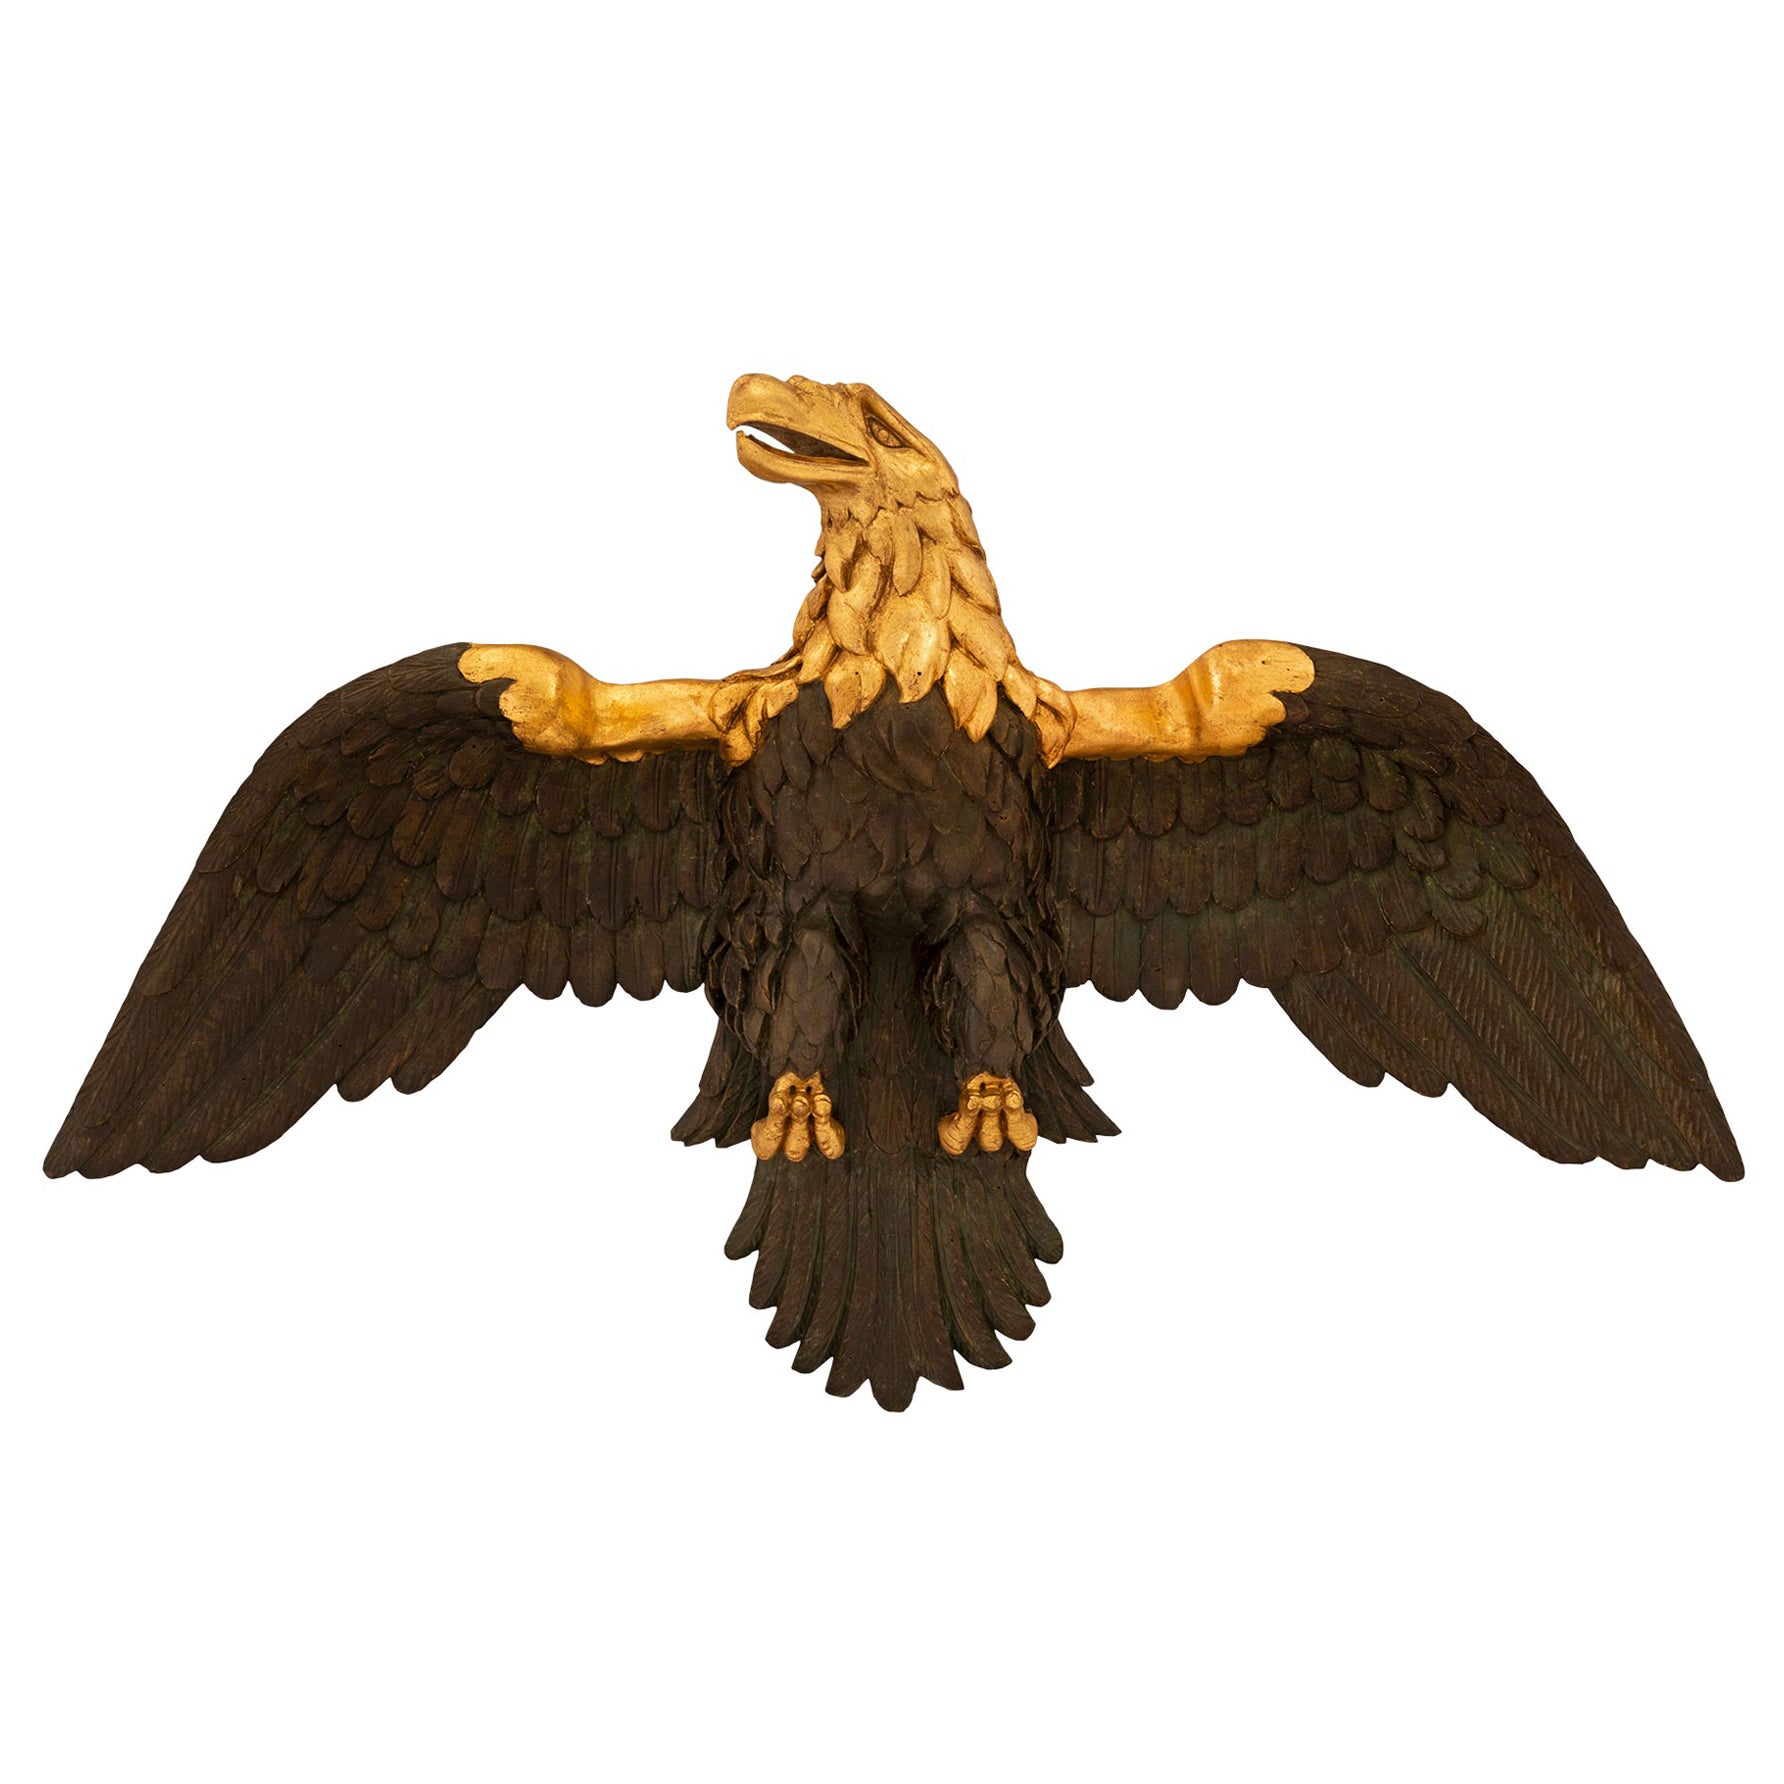 French 19th Century 1st Empire Period Giltwood and Polychrome Eagle Wall Decor For Sale